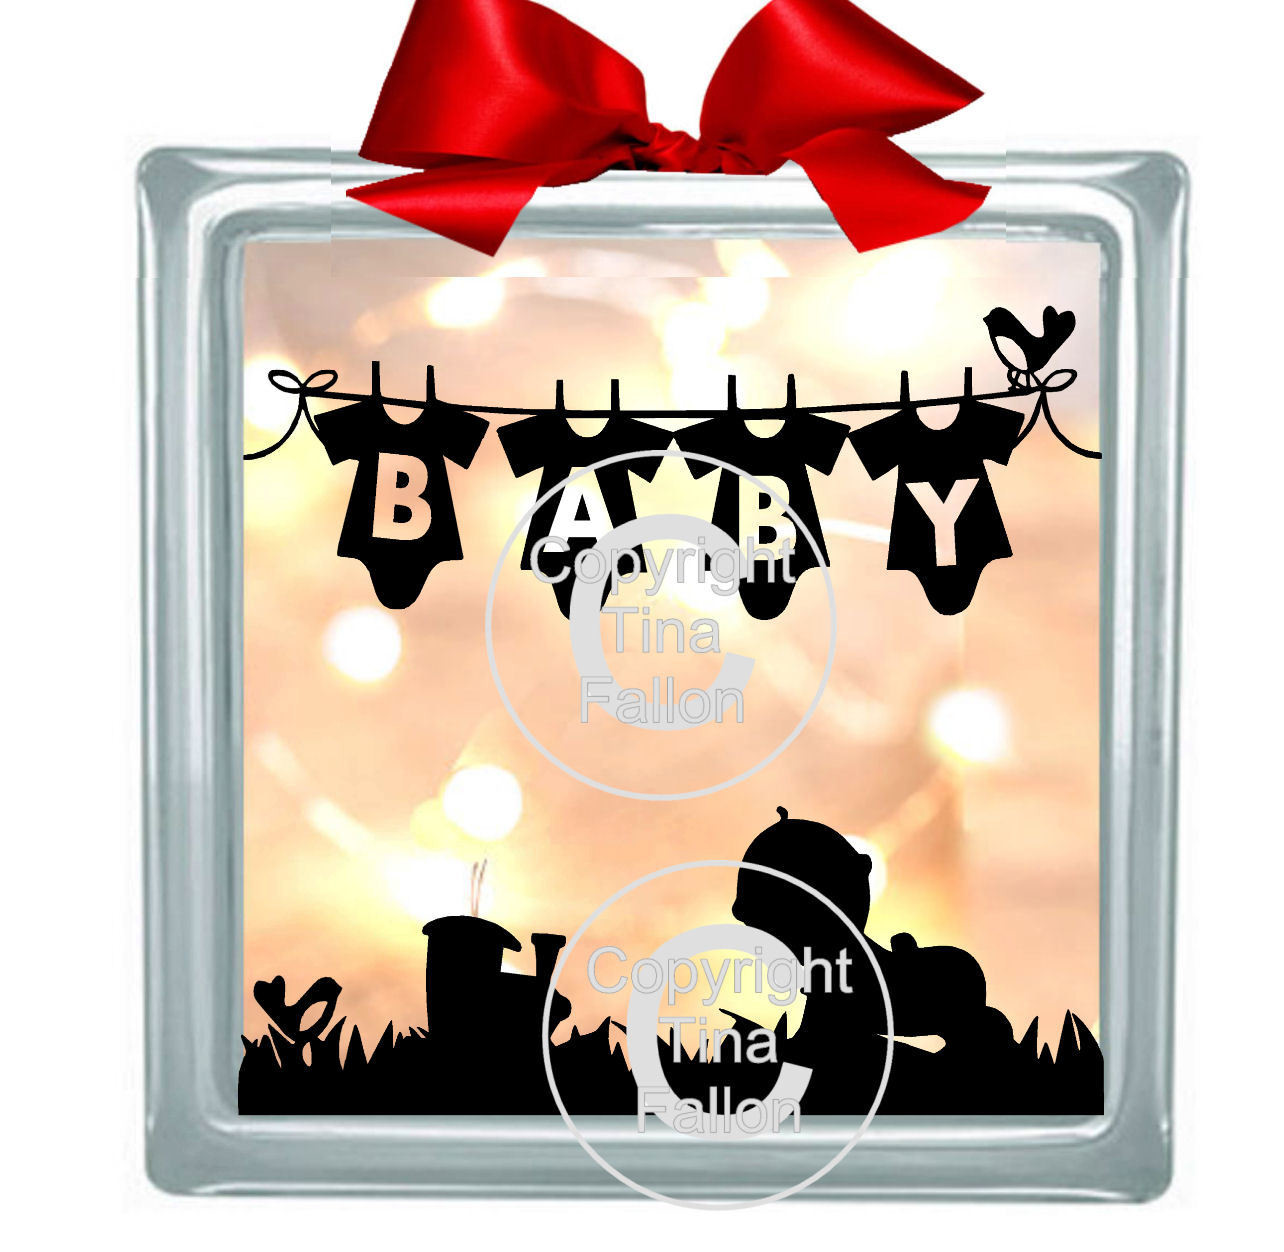 Washing Line Baby Boy Glass Block Tile Design 6x6 inches